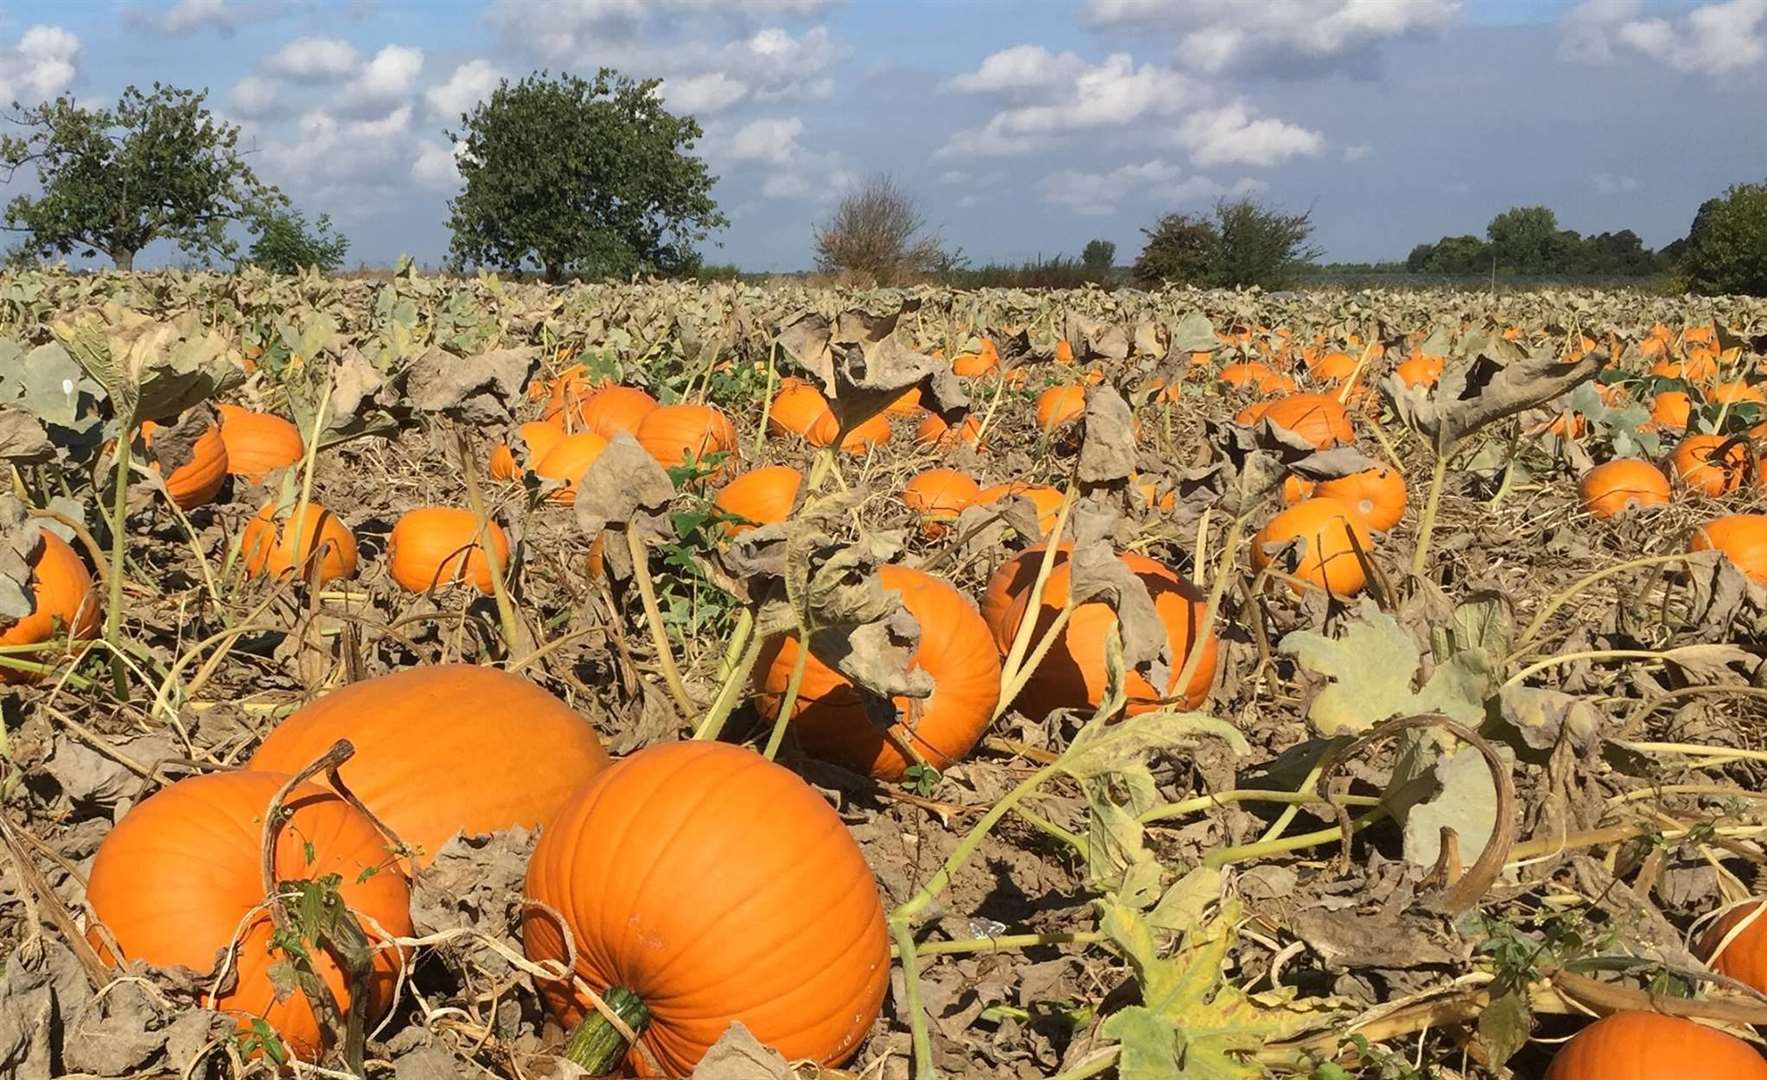 Pumpkins have sold out in the past so make sure you visit the pumpkin patches early. Picture: Saffery Farm Facebook